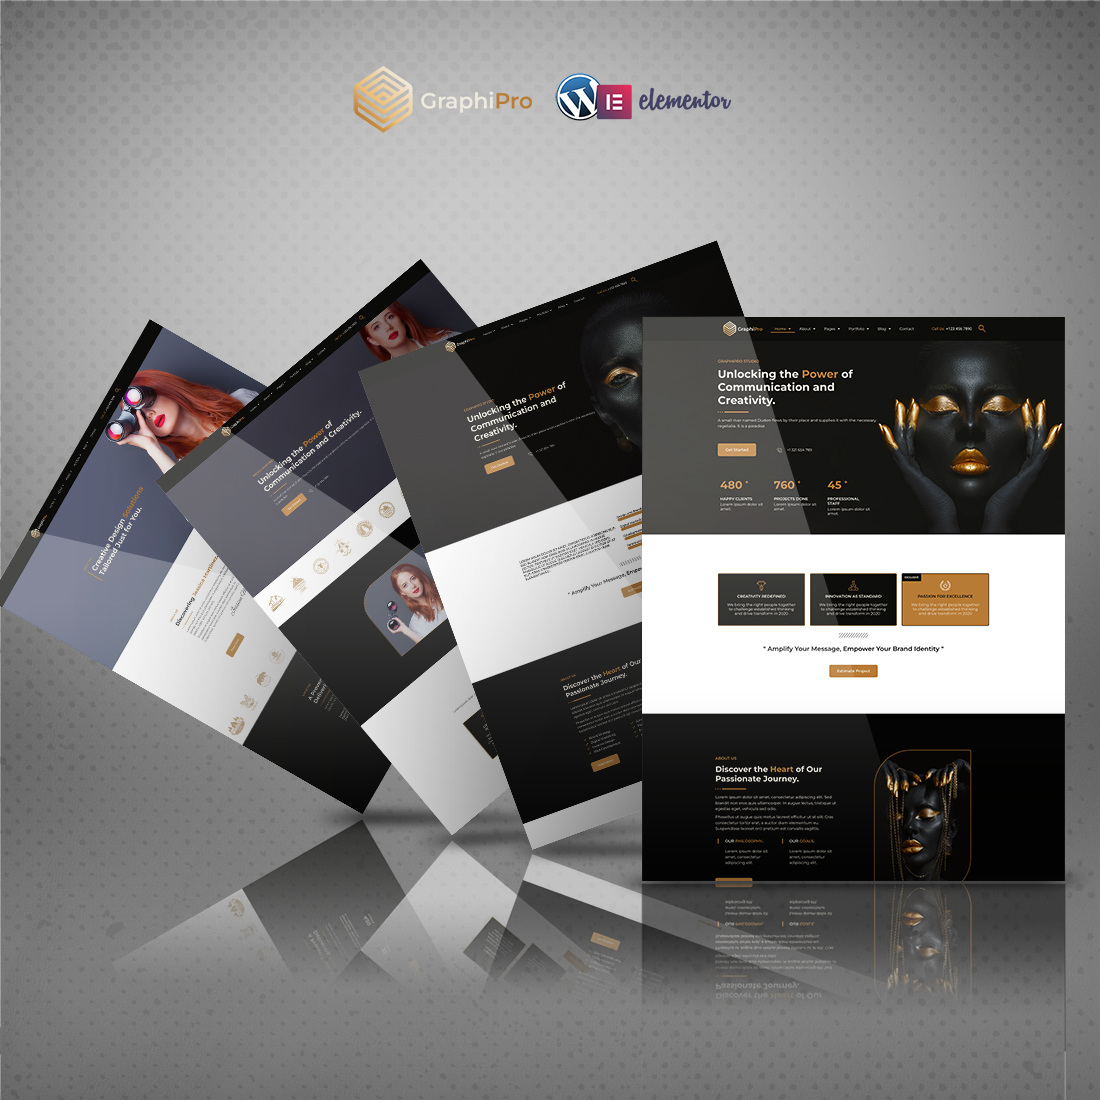 GraphiPro - Premium Digital Agency Elementor Template Kit preview image.